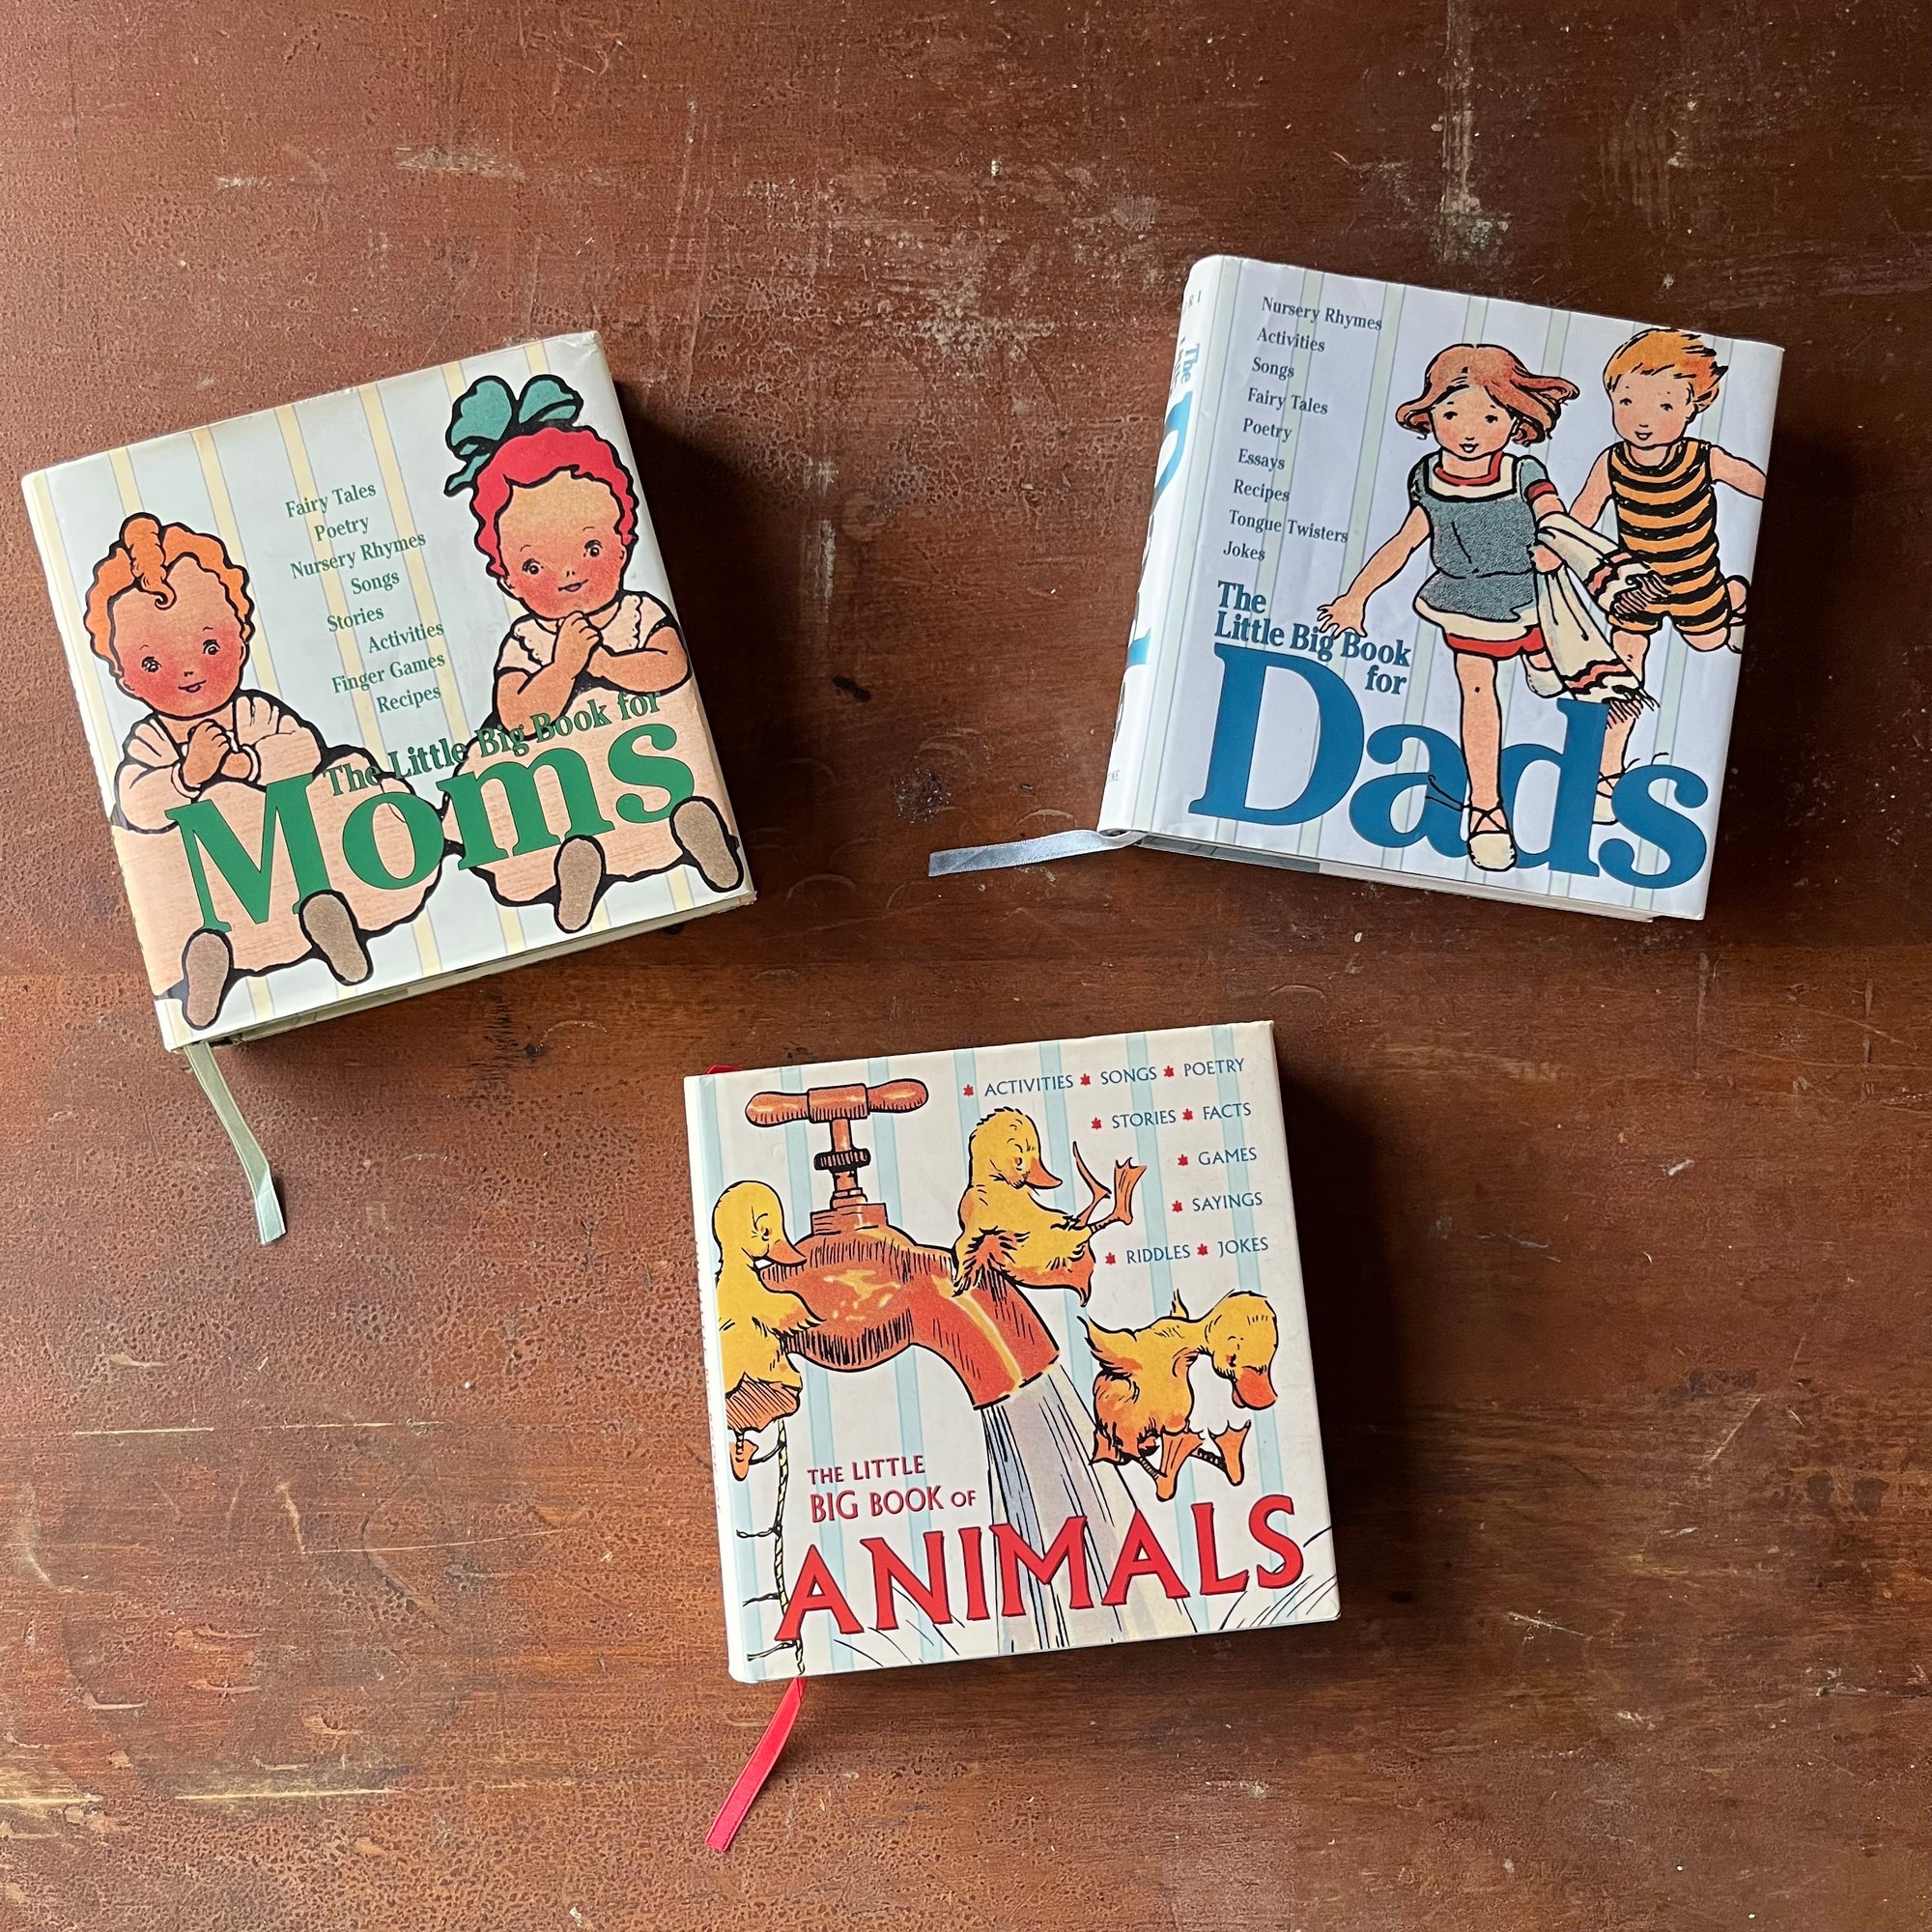 The Little Big Book of Moms, Dads, Animals-Welcome Books-First Edition Gift Books-view of the dust jacket's front covers with illustrations & book titles